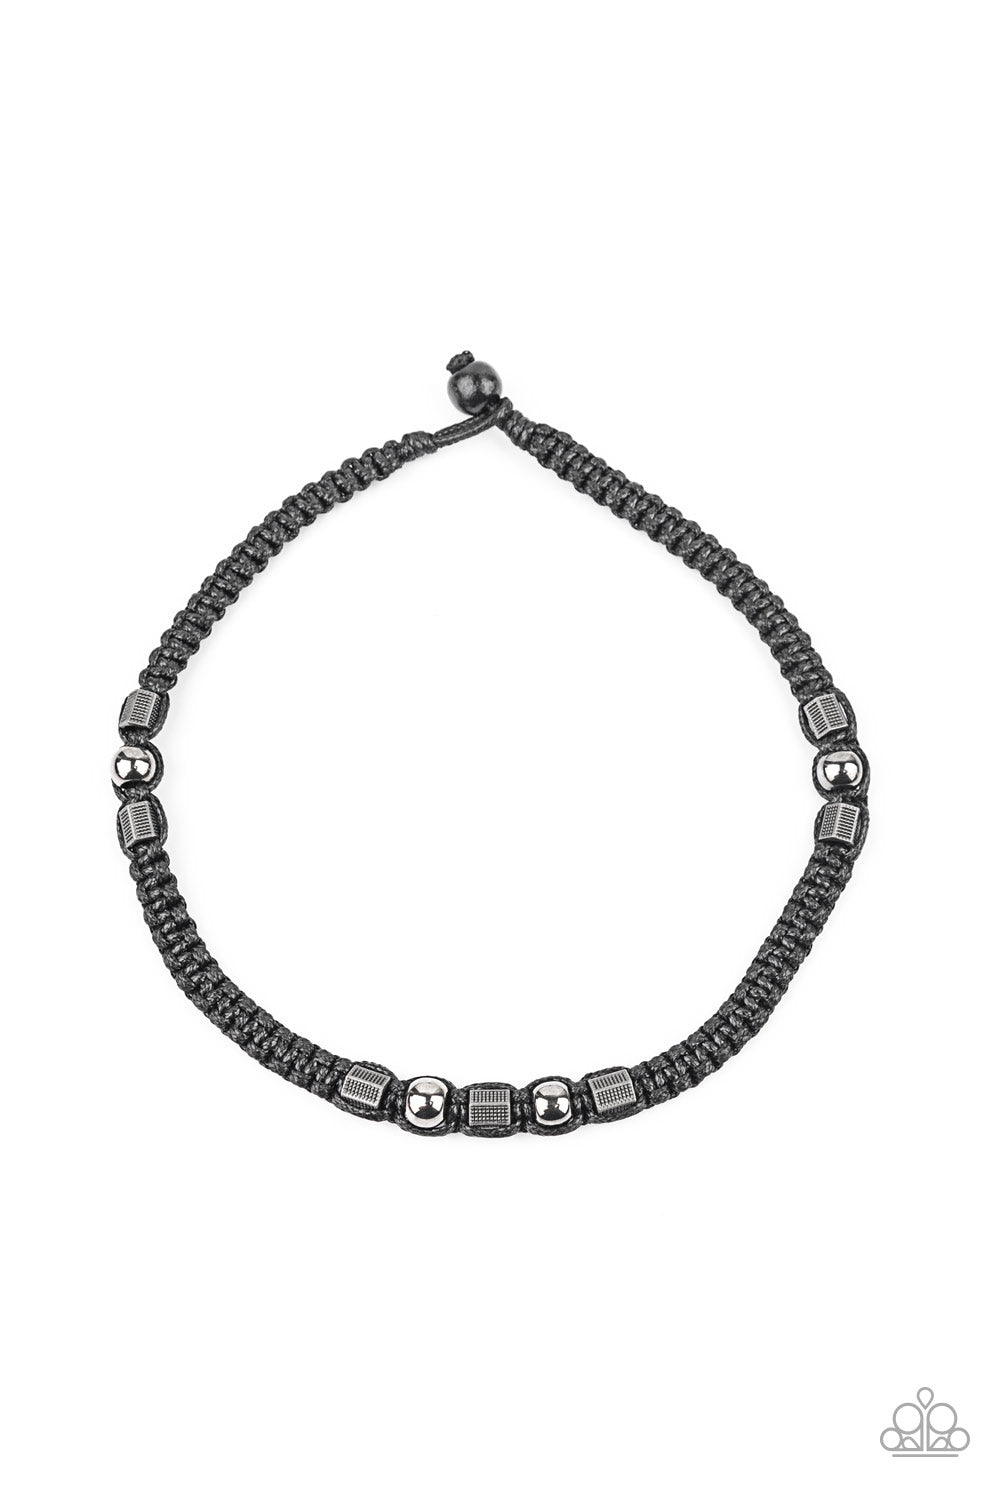 &lt;P&gt;Sections of gunmetal beads and studded hexagonal accents are knotted in place along a black cord that has been braided around the neck for a seasonal look. Features a button loop closure. &lt;/p&gt;

&lt;P&gt;&lt;i&gt; Sold as one individual necklace.
&lt;/i&gt;&lt;/p&gt;

&lt;img src=\&quot;https://d9b54x484lq62.cloudfront.net/paparazzi/shopping/images/517_tag150x115_1.png\&quot; alt=\&quot;New Kit\&quot; align=\&quot;middle\&quot; height=\&quot;50\&quot; width=\&quot;50\&quot;/&gt;